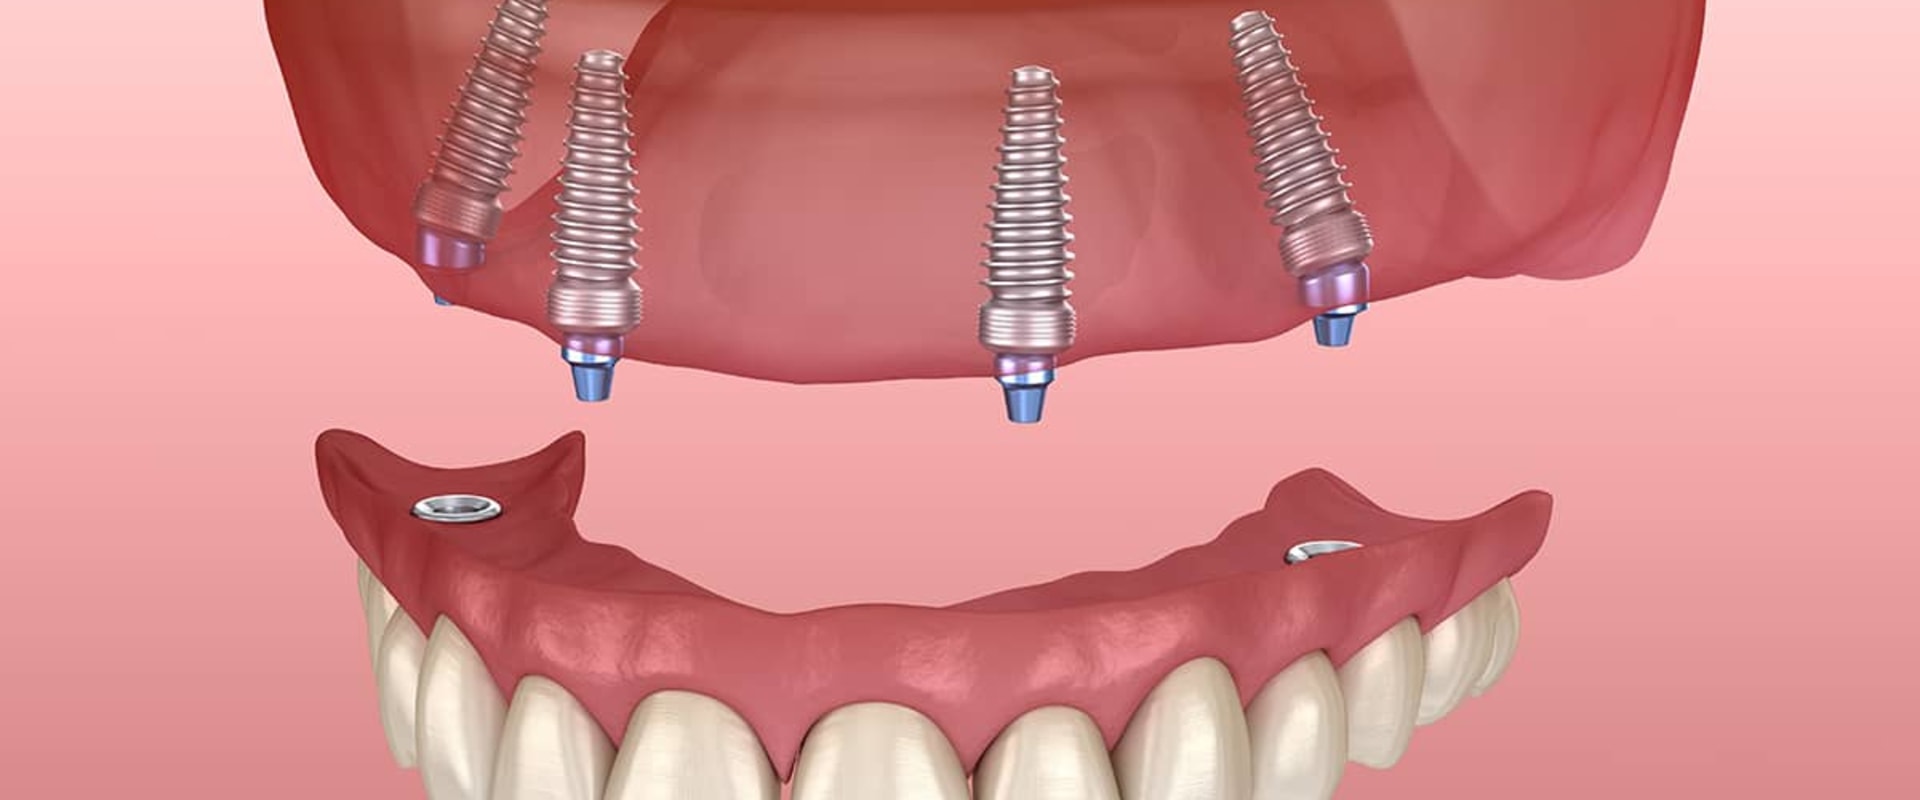 Location and Dentist's Experience: A Comprehensive Look at Factors Affecting Implant Supported Denture Costs